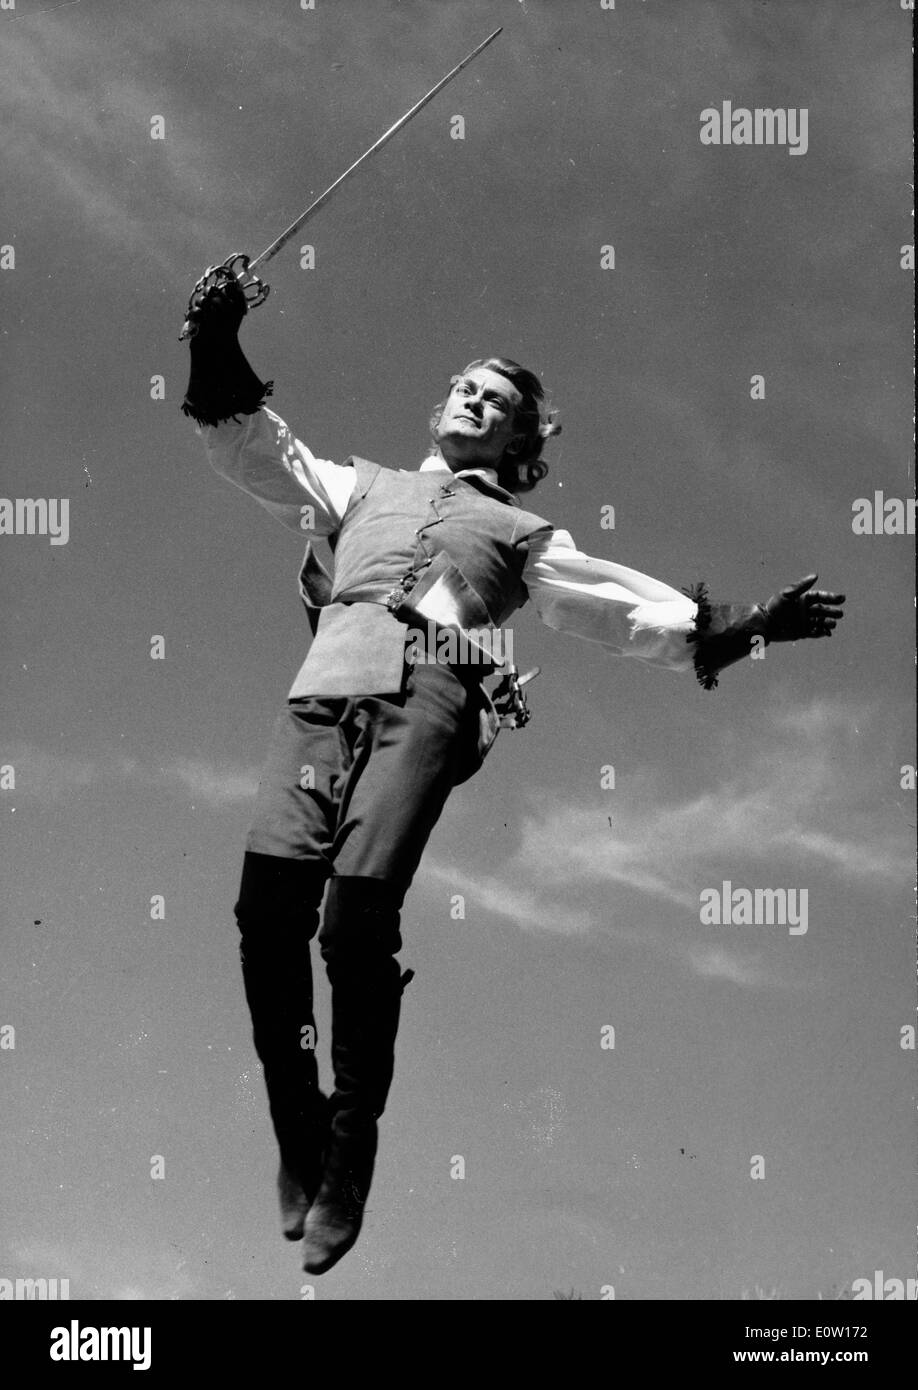 Jean Marais flying in a scene from a movie Stock Photo